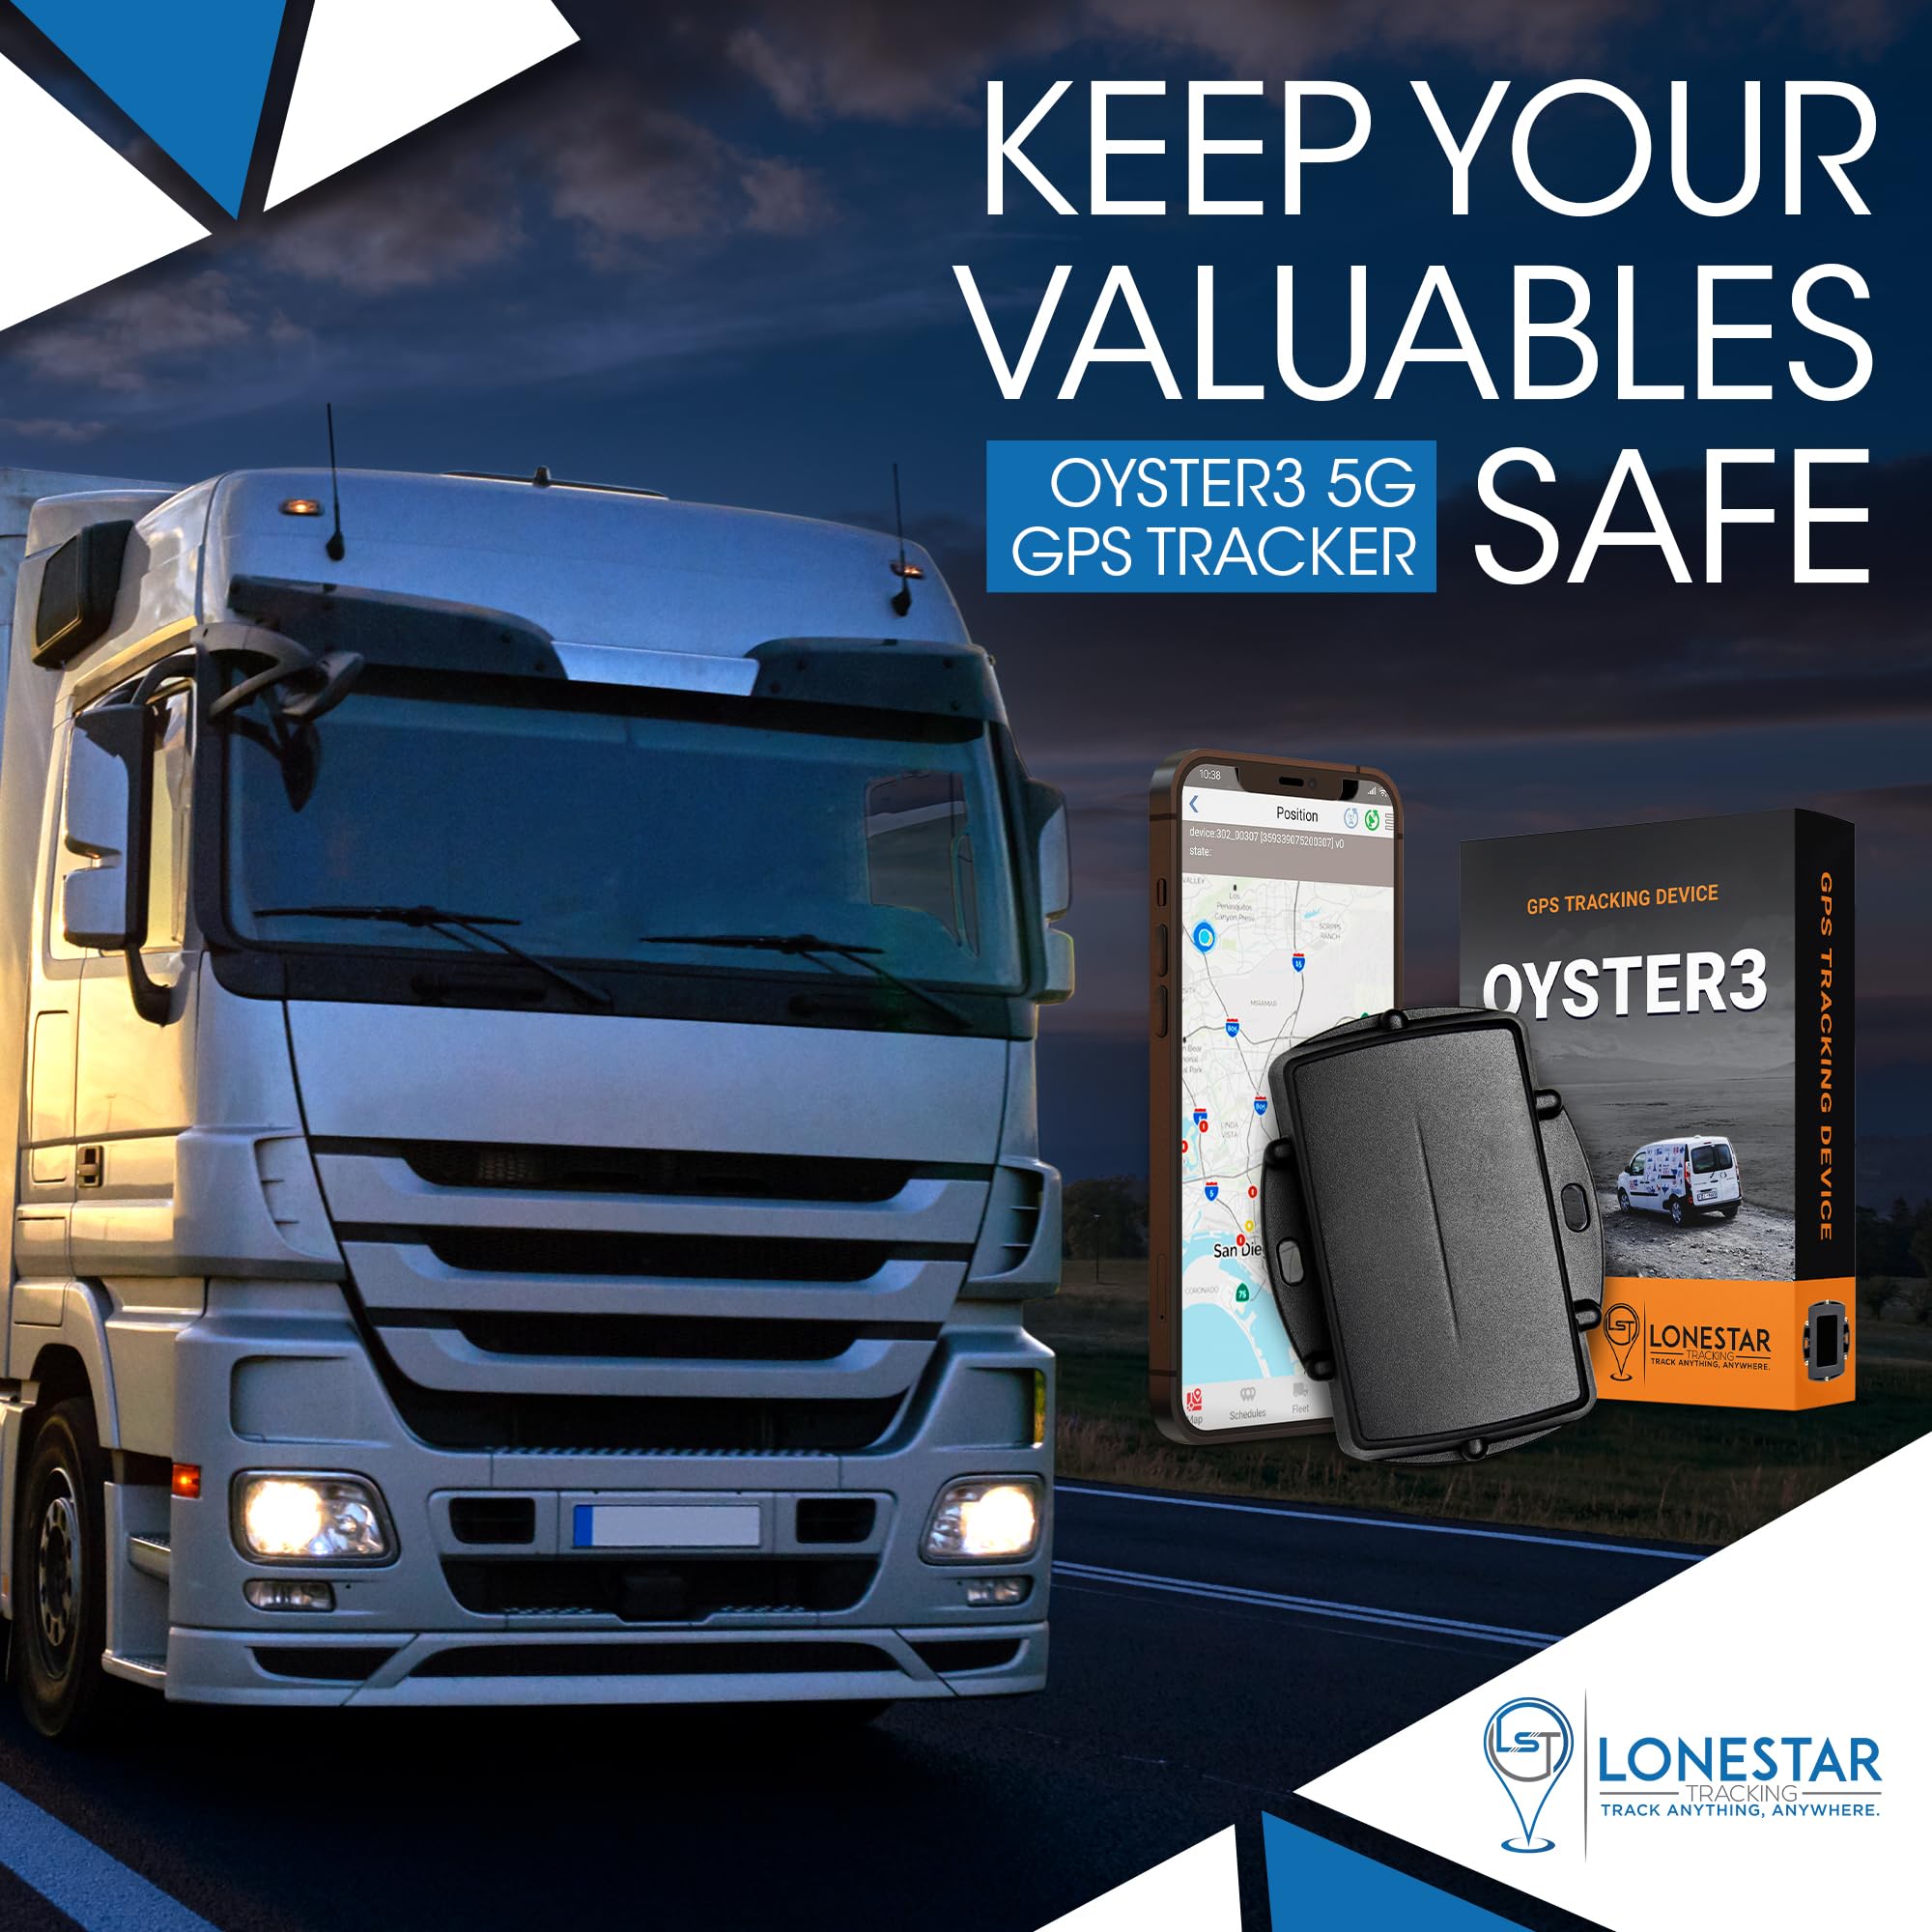 LoneStar Tracking Oyster3 5G/4G GPS Tracker for Assets with Two Magnets Bundle - Car GPS Tracker, GPS Tracker for Vehicles, Fleet Management, Waterproof GPS for Asset Tracking (Subscription Required)